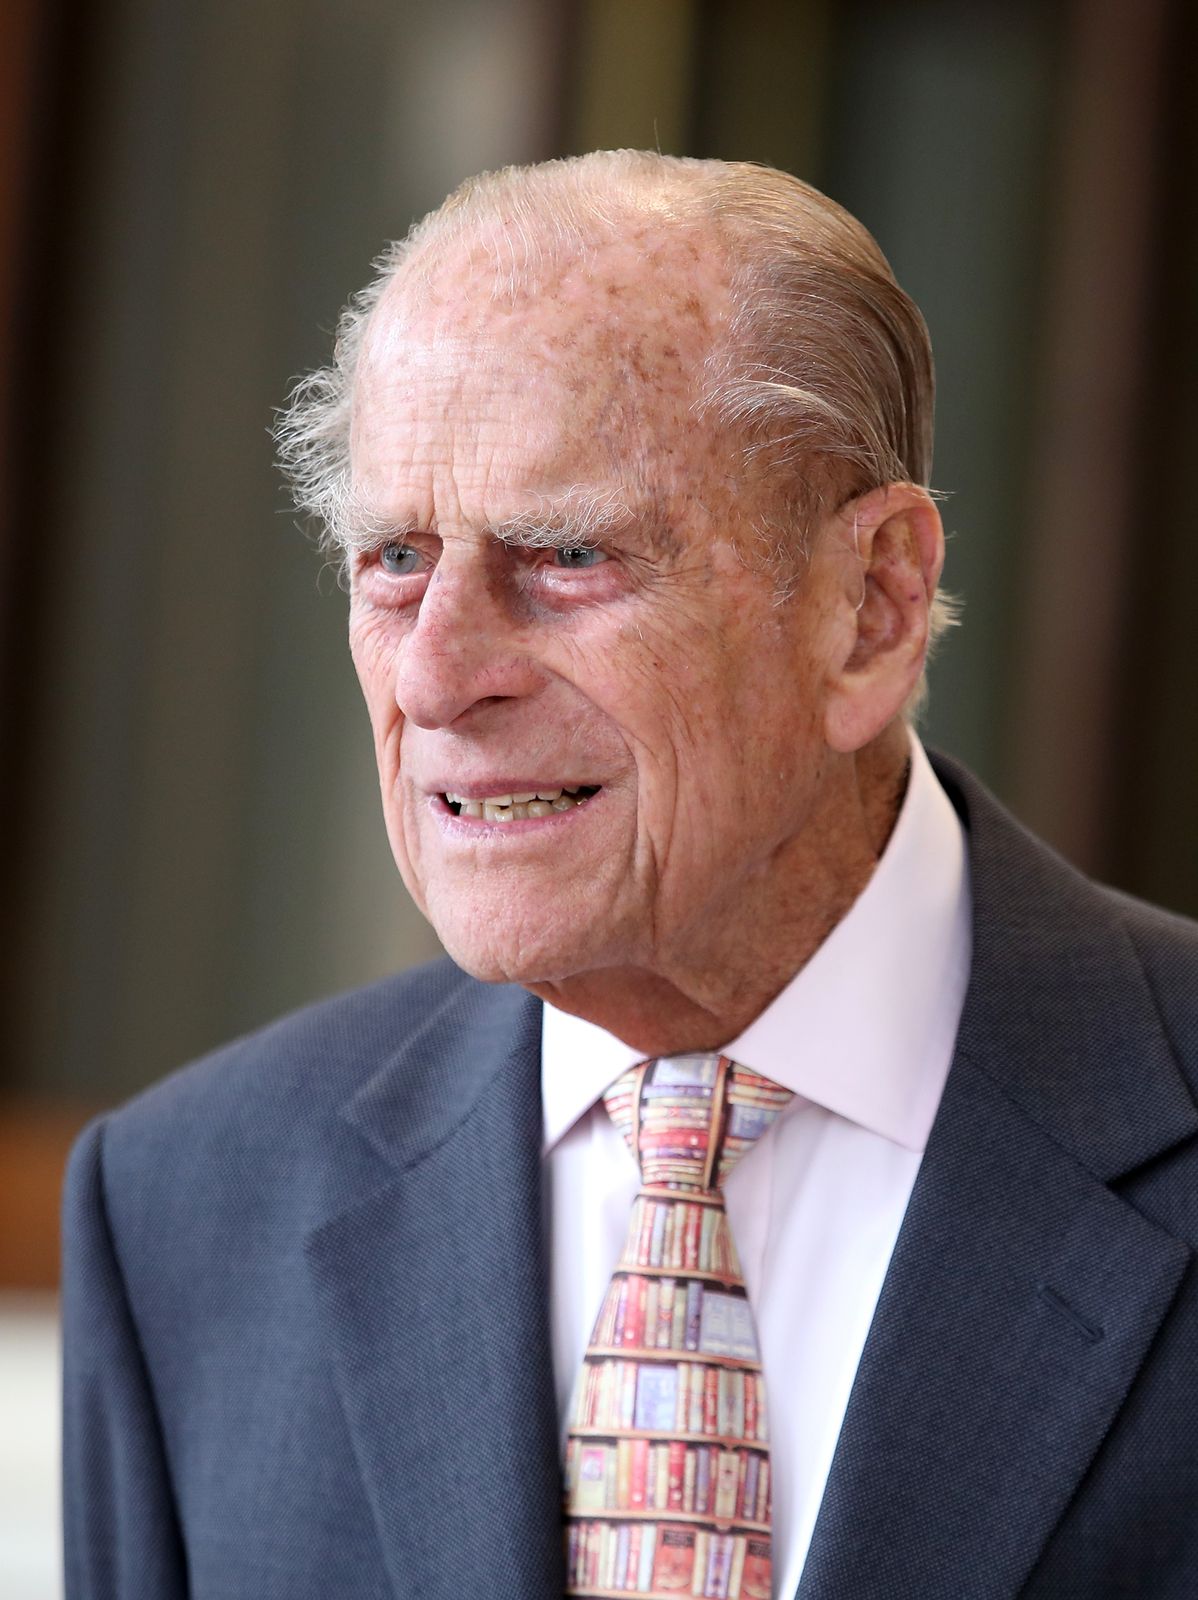 Prince Philip at a state visit by the King and Queen of Spain on July 14, 2017, in London, England | Photo: Chris Jackson/Getty Images